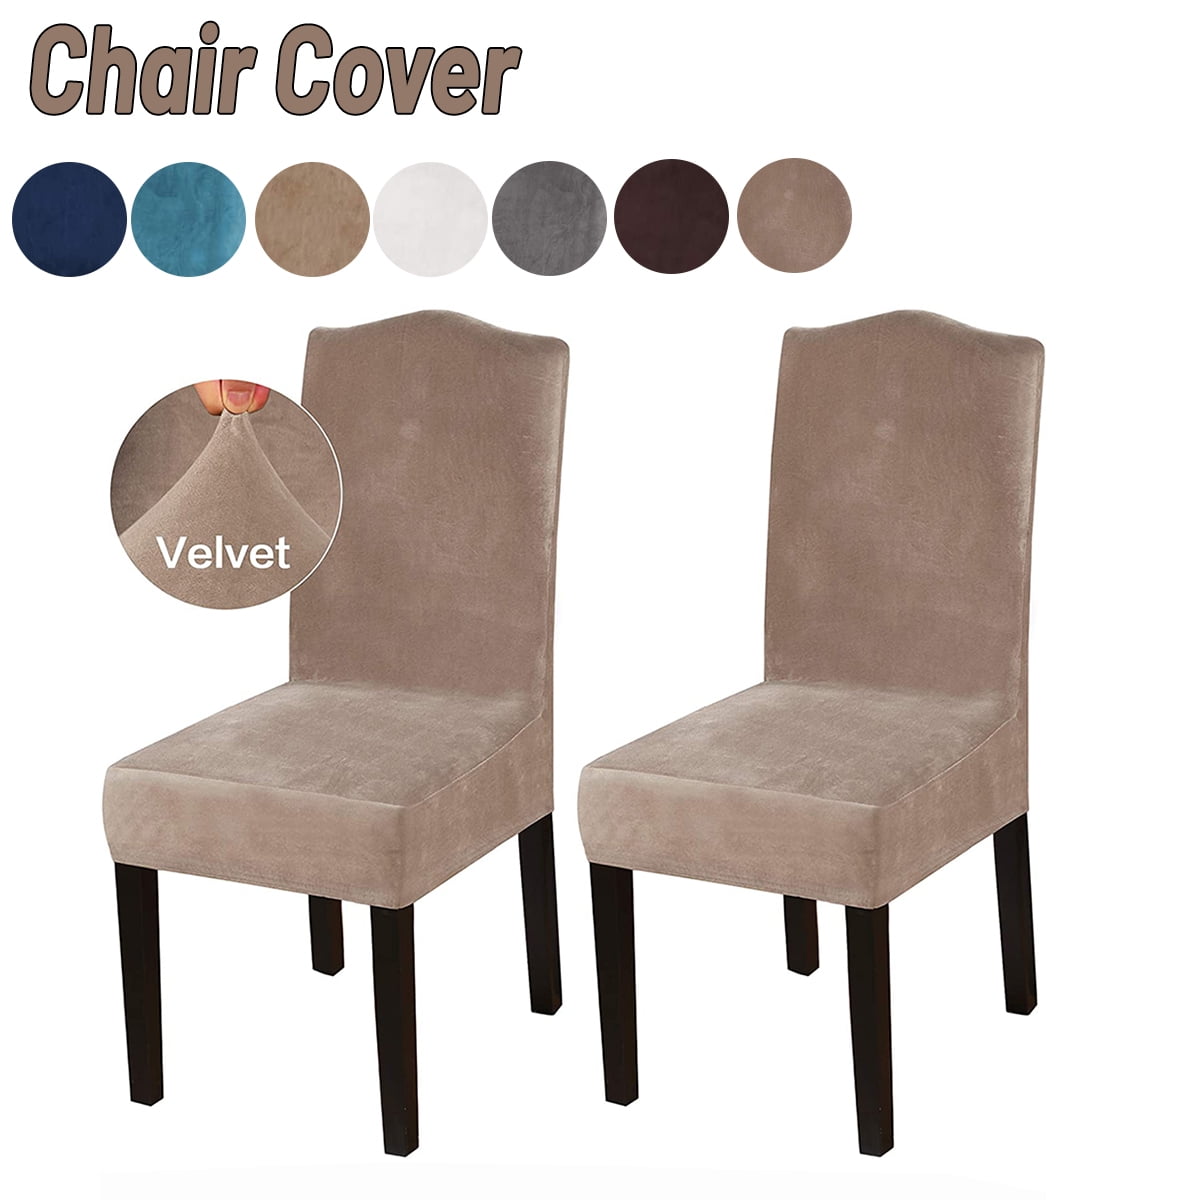 Waterproof Stretch Dining Room Chair Cover Spandex  Soft Jacquard Seat Covers 